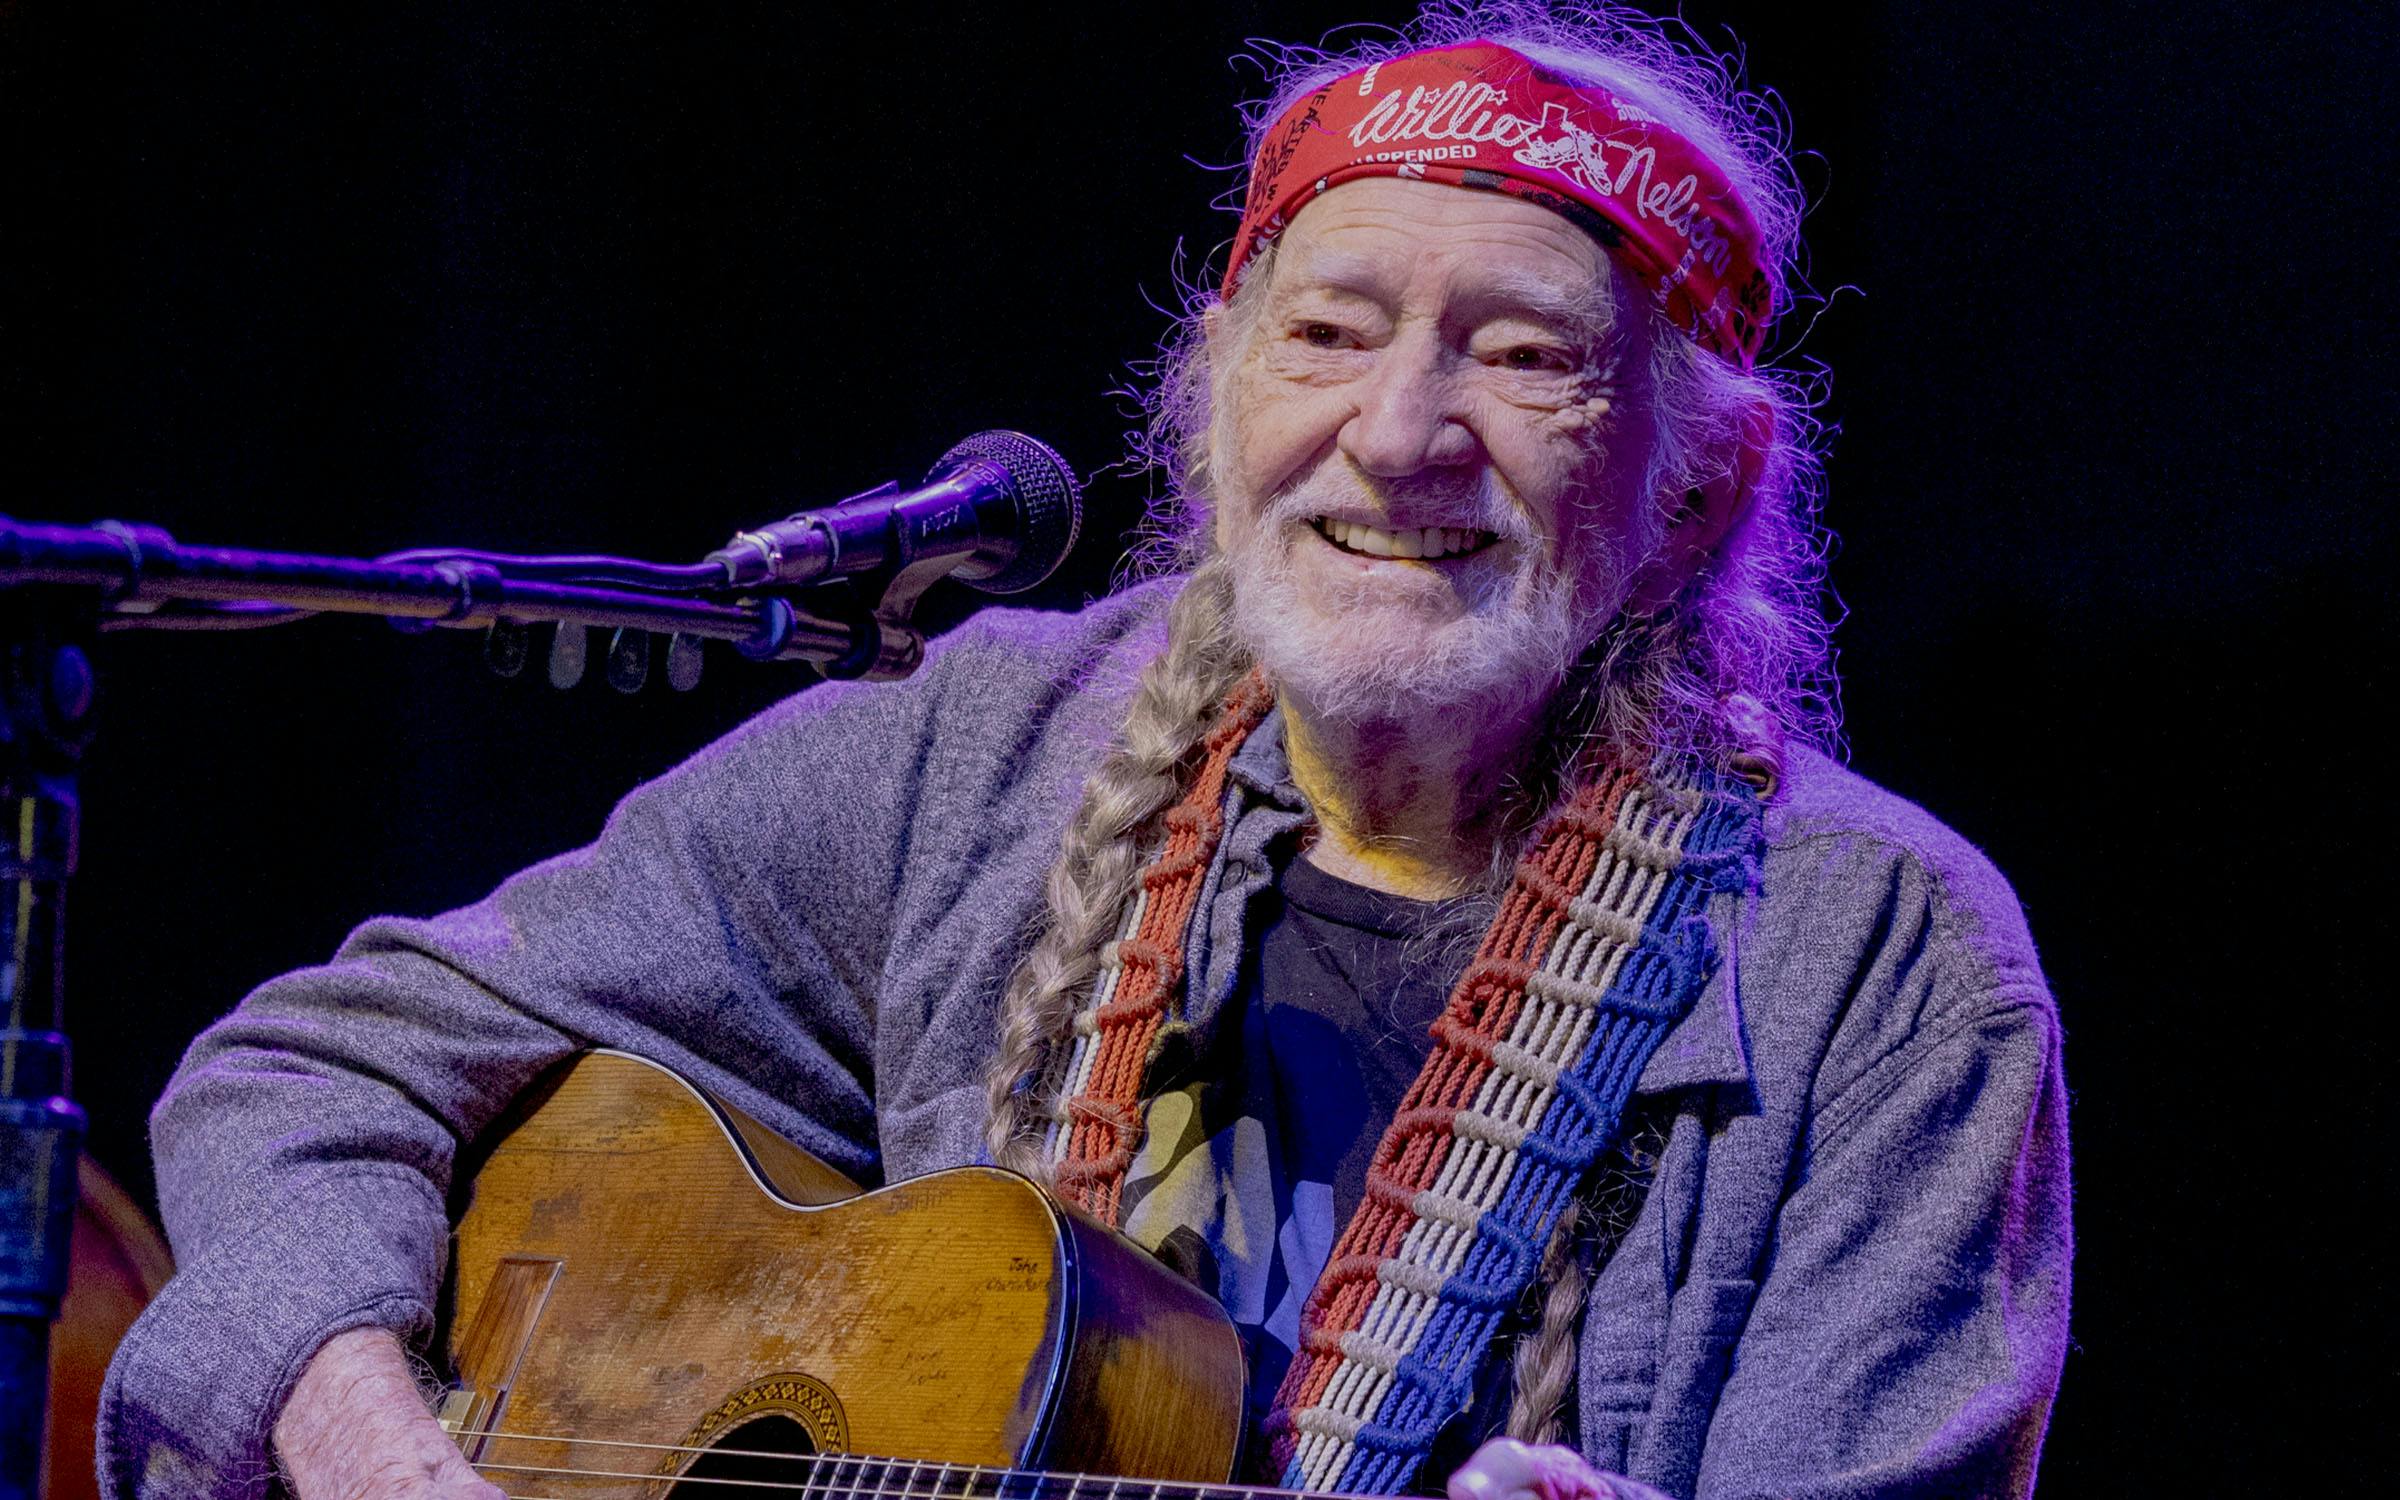 Willie Nelson returns to the stage at the 4th of July picnic